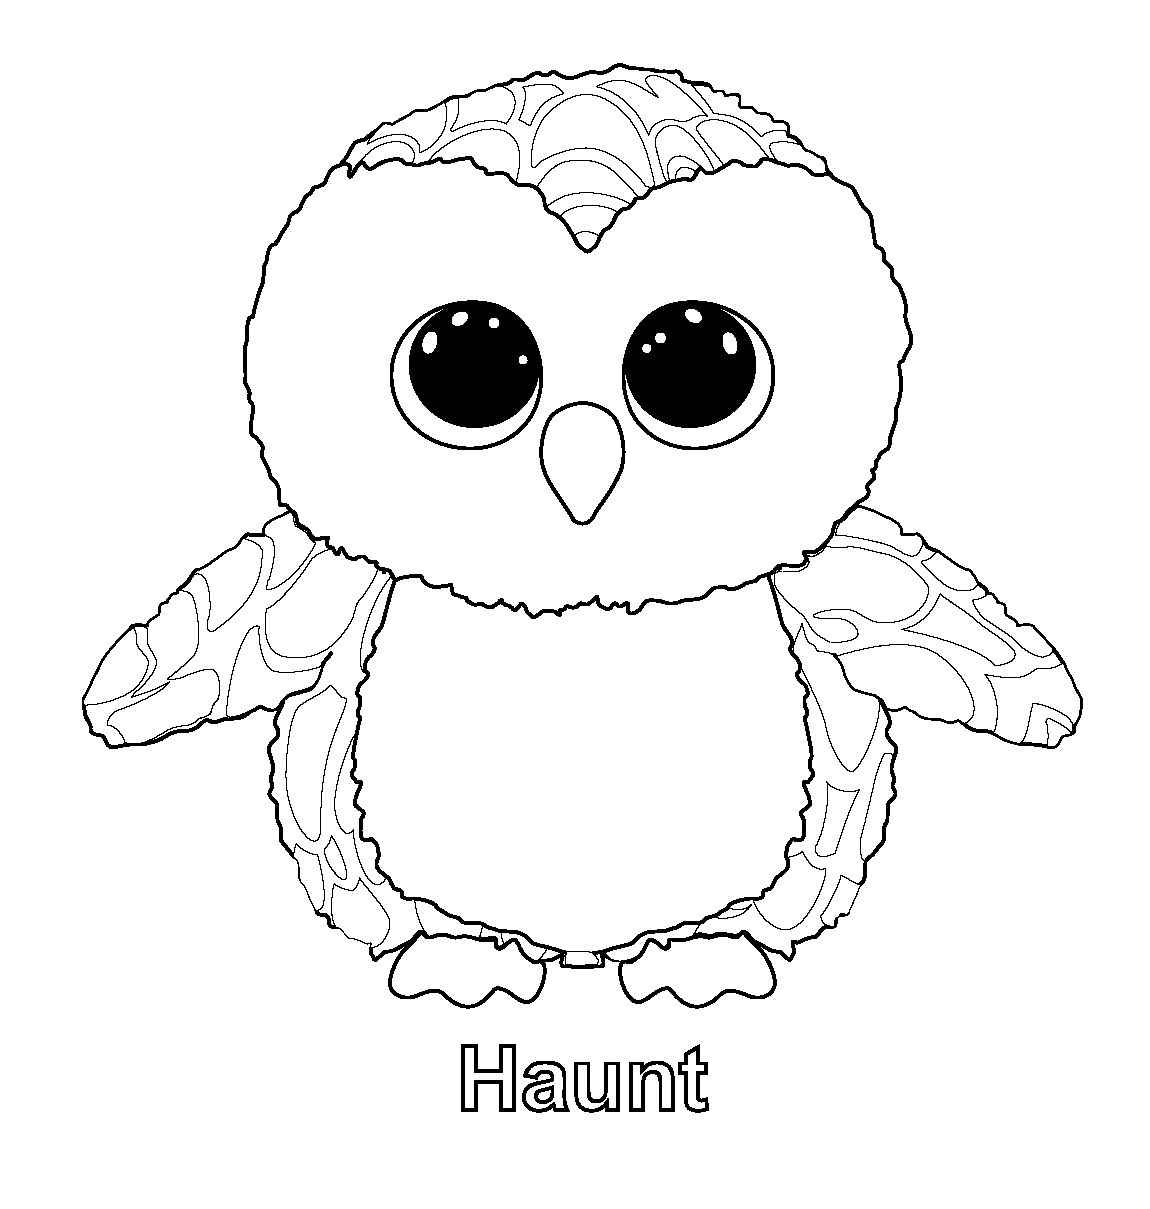 Haunt Beanie Boos Coloring Pages